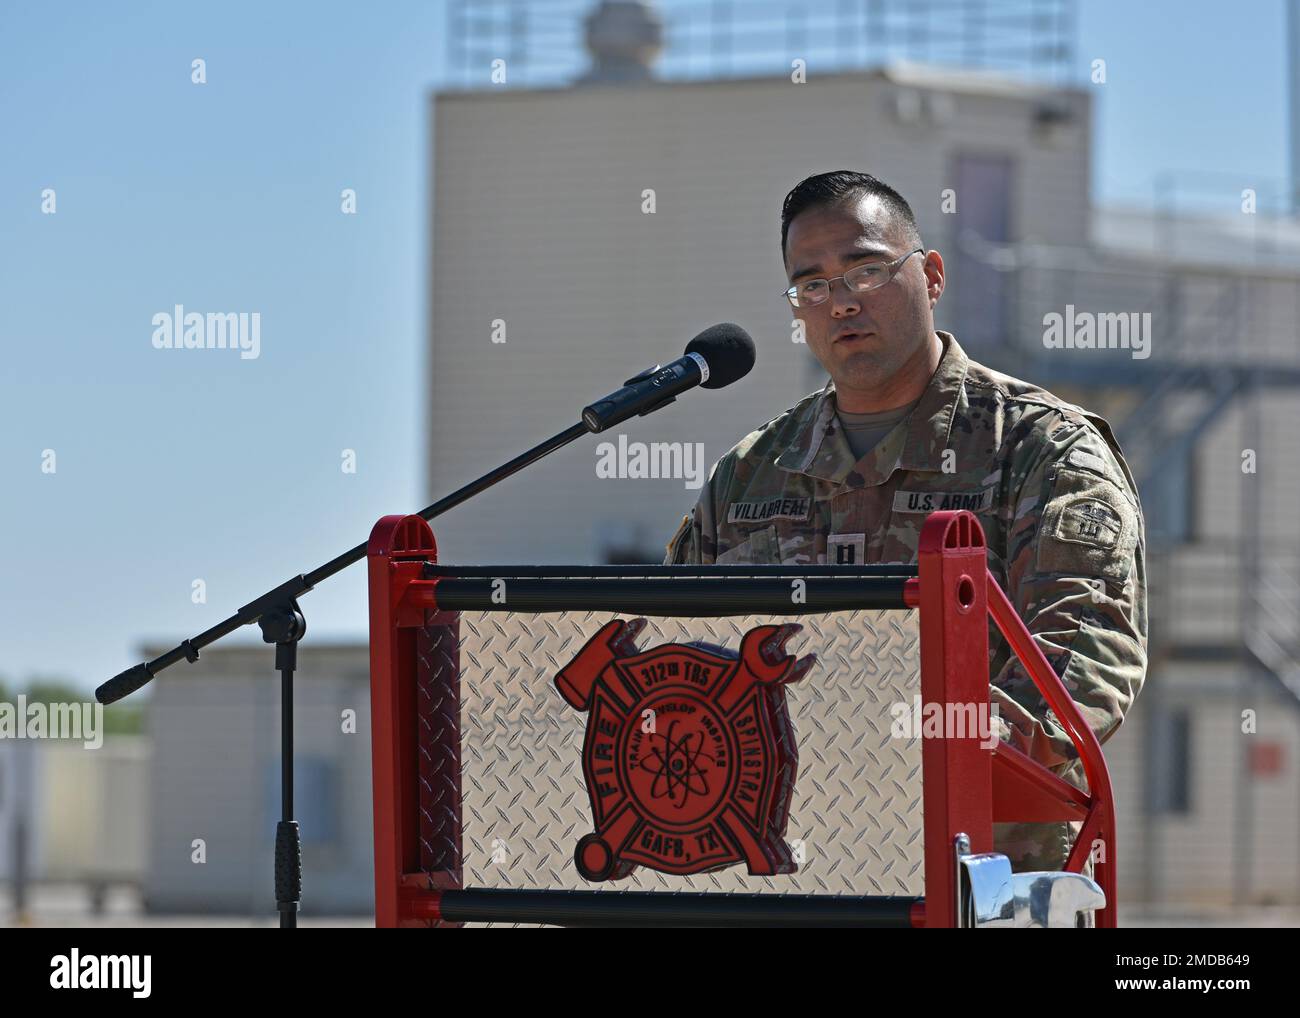 U.S. Army Capt. Astin Villarreal, outgoing Delta Company 169th Engineer Battalion commander, speaks during their change of command at Goodfellow Air Force Base, Texas, July 15, 2022. Villarreal thanked 169th EN BN leadership for their support during his time in command. Stock Photo